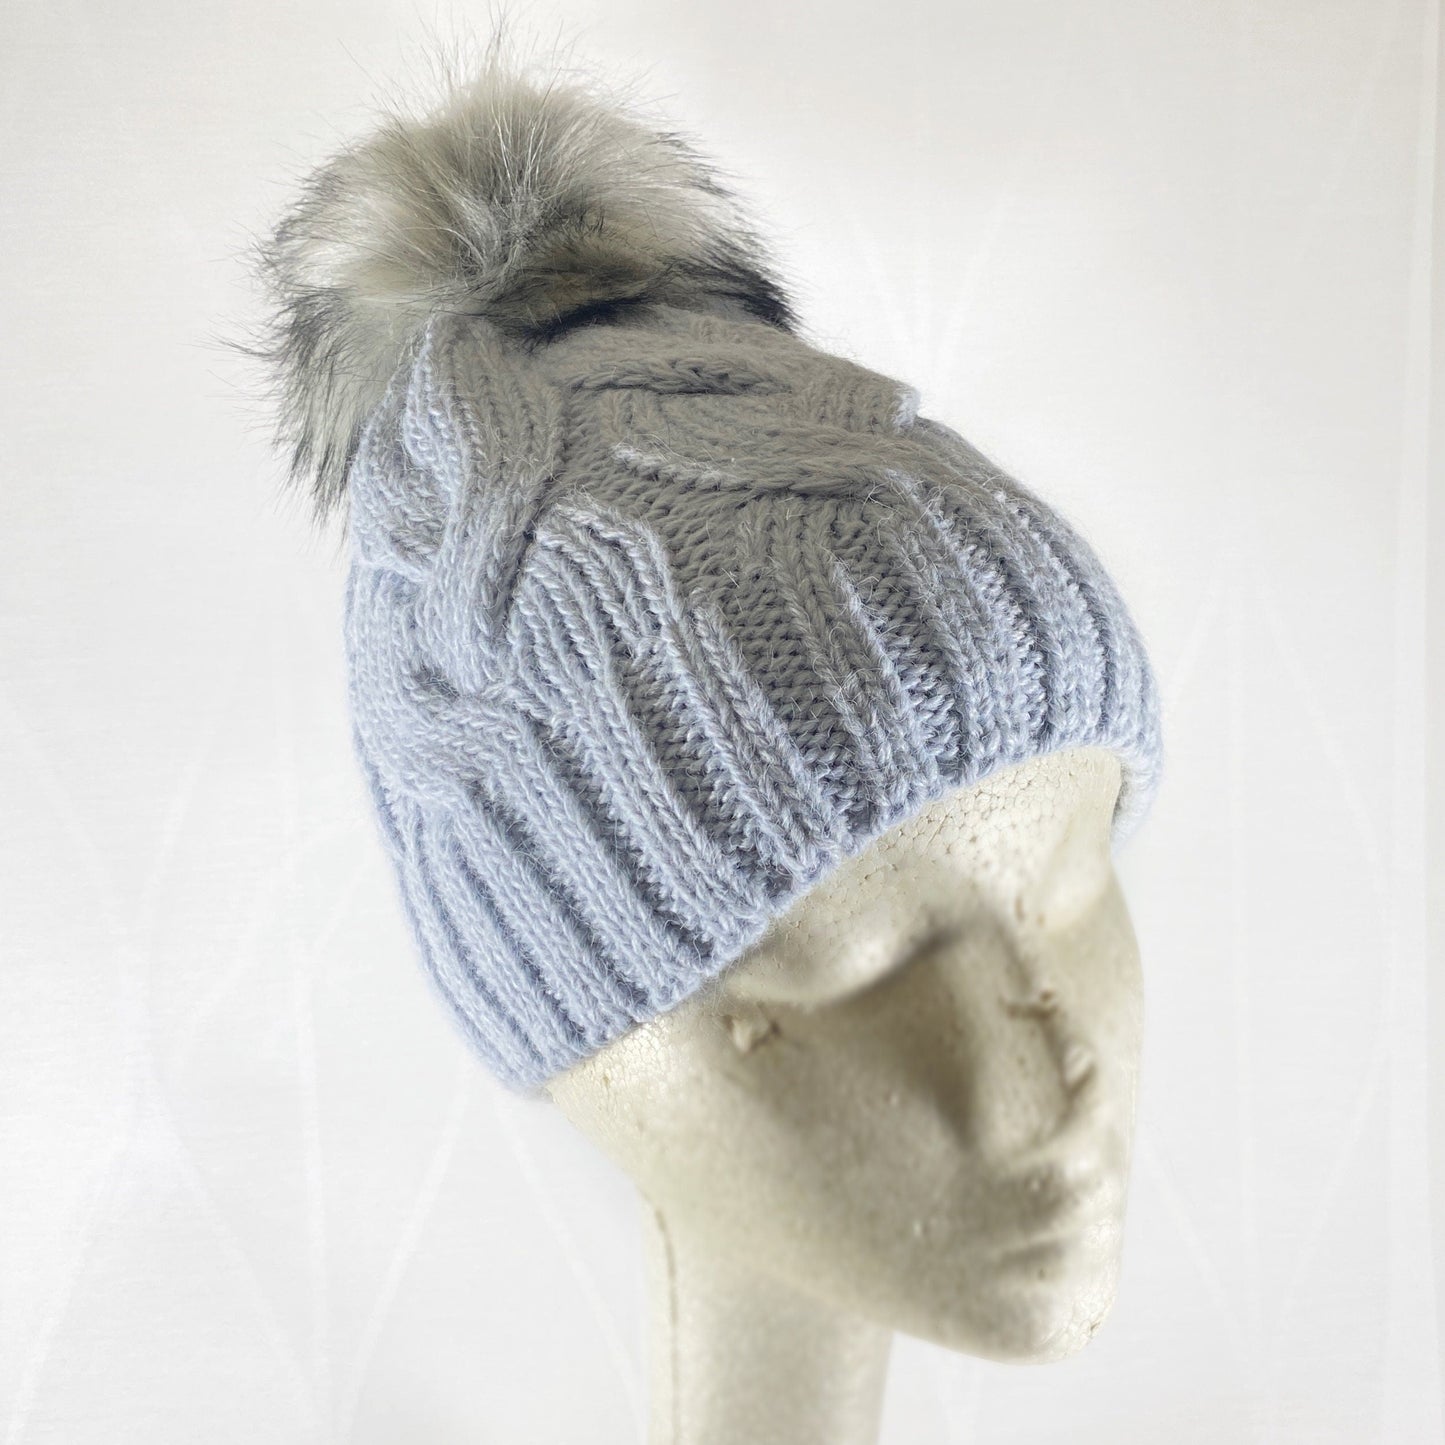 Baby Blue Winter Beanie With Pompom - Made From Italian Wool, Acrylic Yarn, and Faux Fur